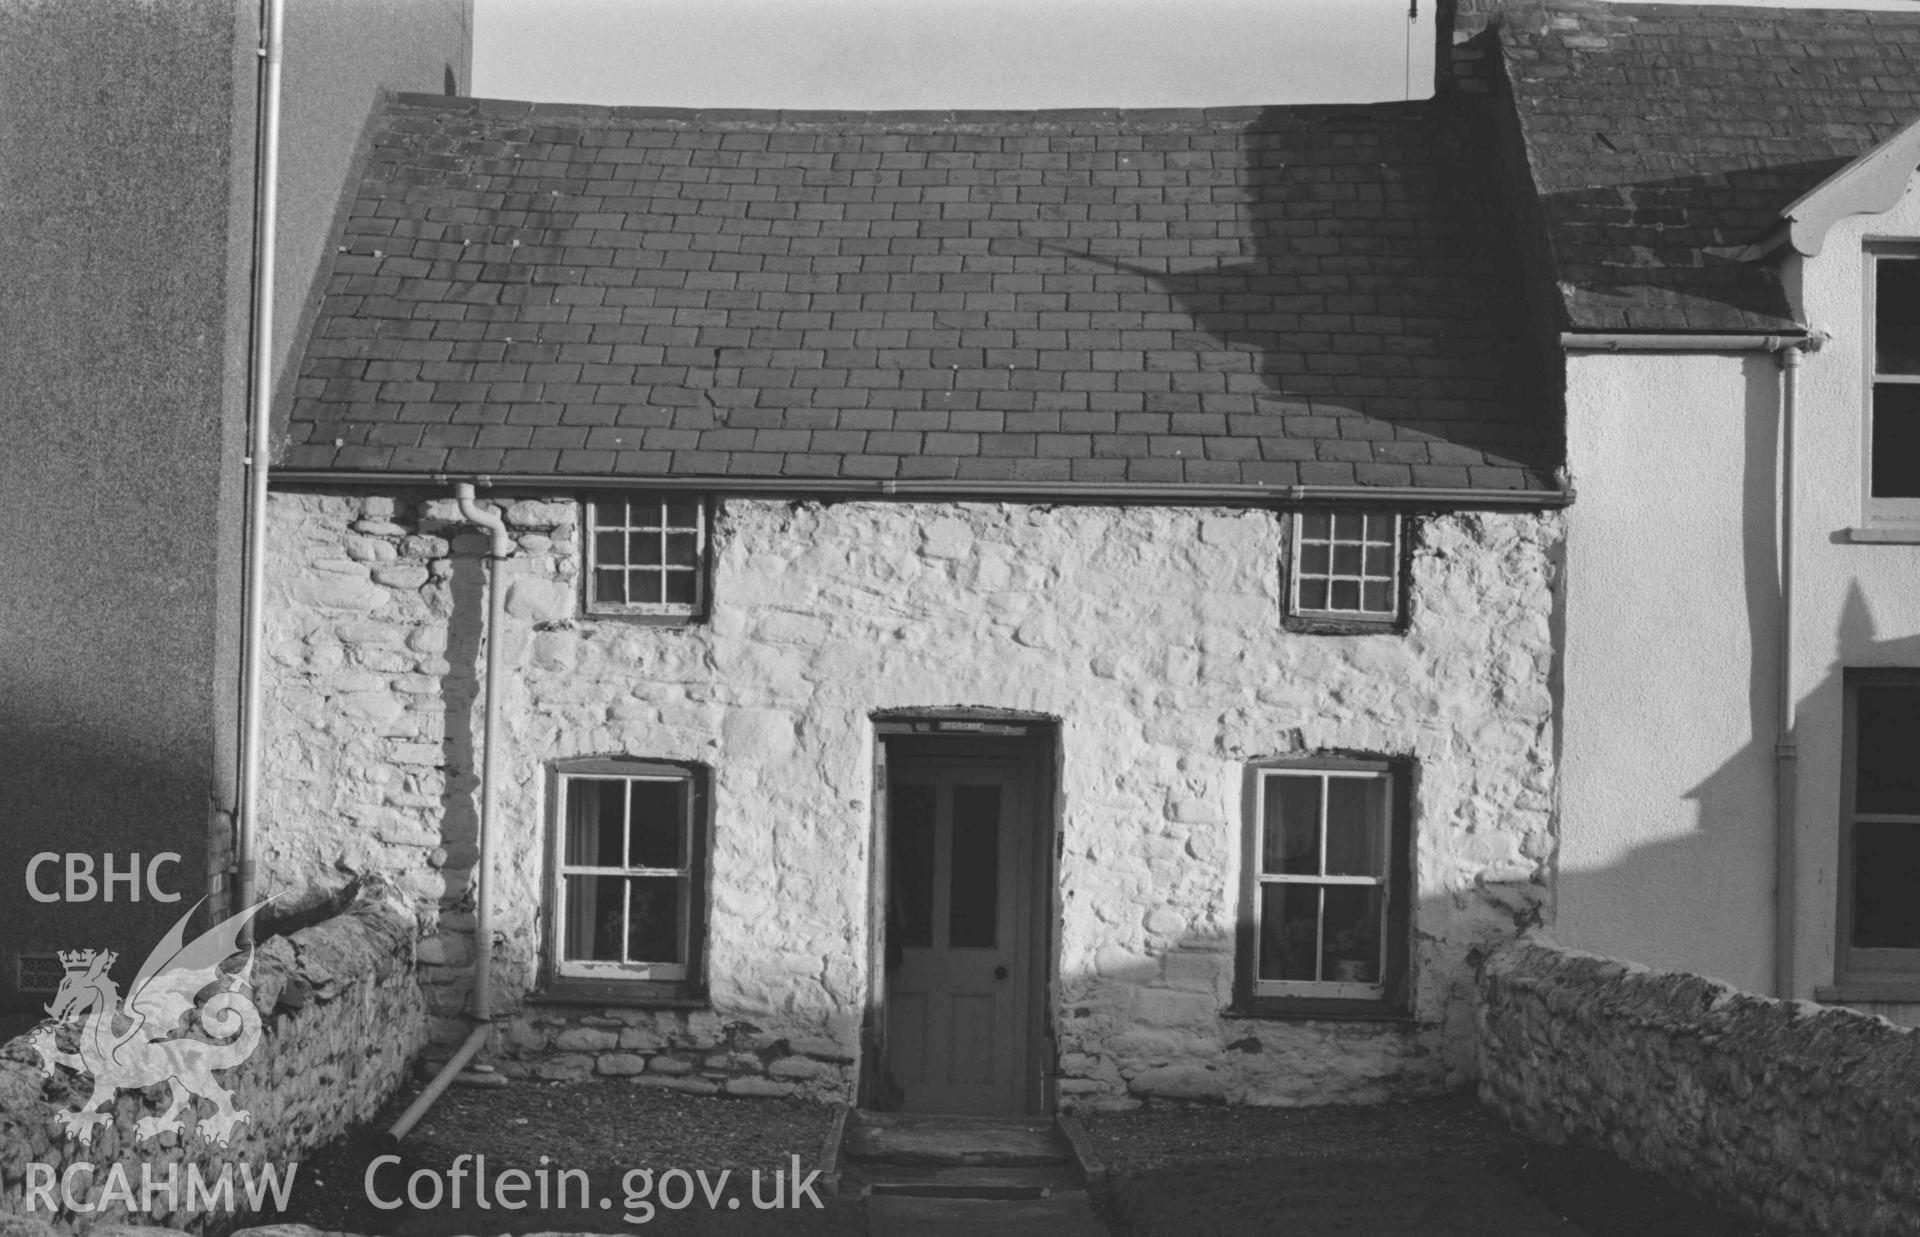 Digital copy of a black and white negative showing cottage two doors north of Gorwel Cottage, High street, Borth. Photographed by Arthur Chater on 2 January 1969. Looking east from Grid Reference SN 6084 8964.